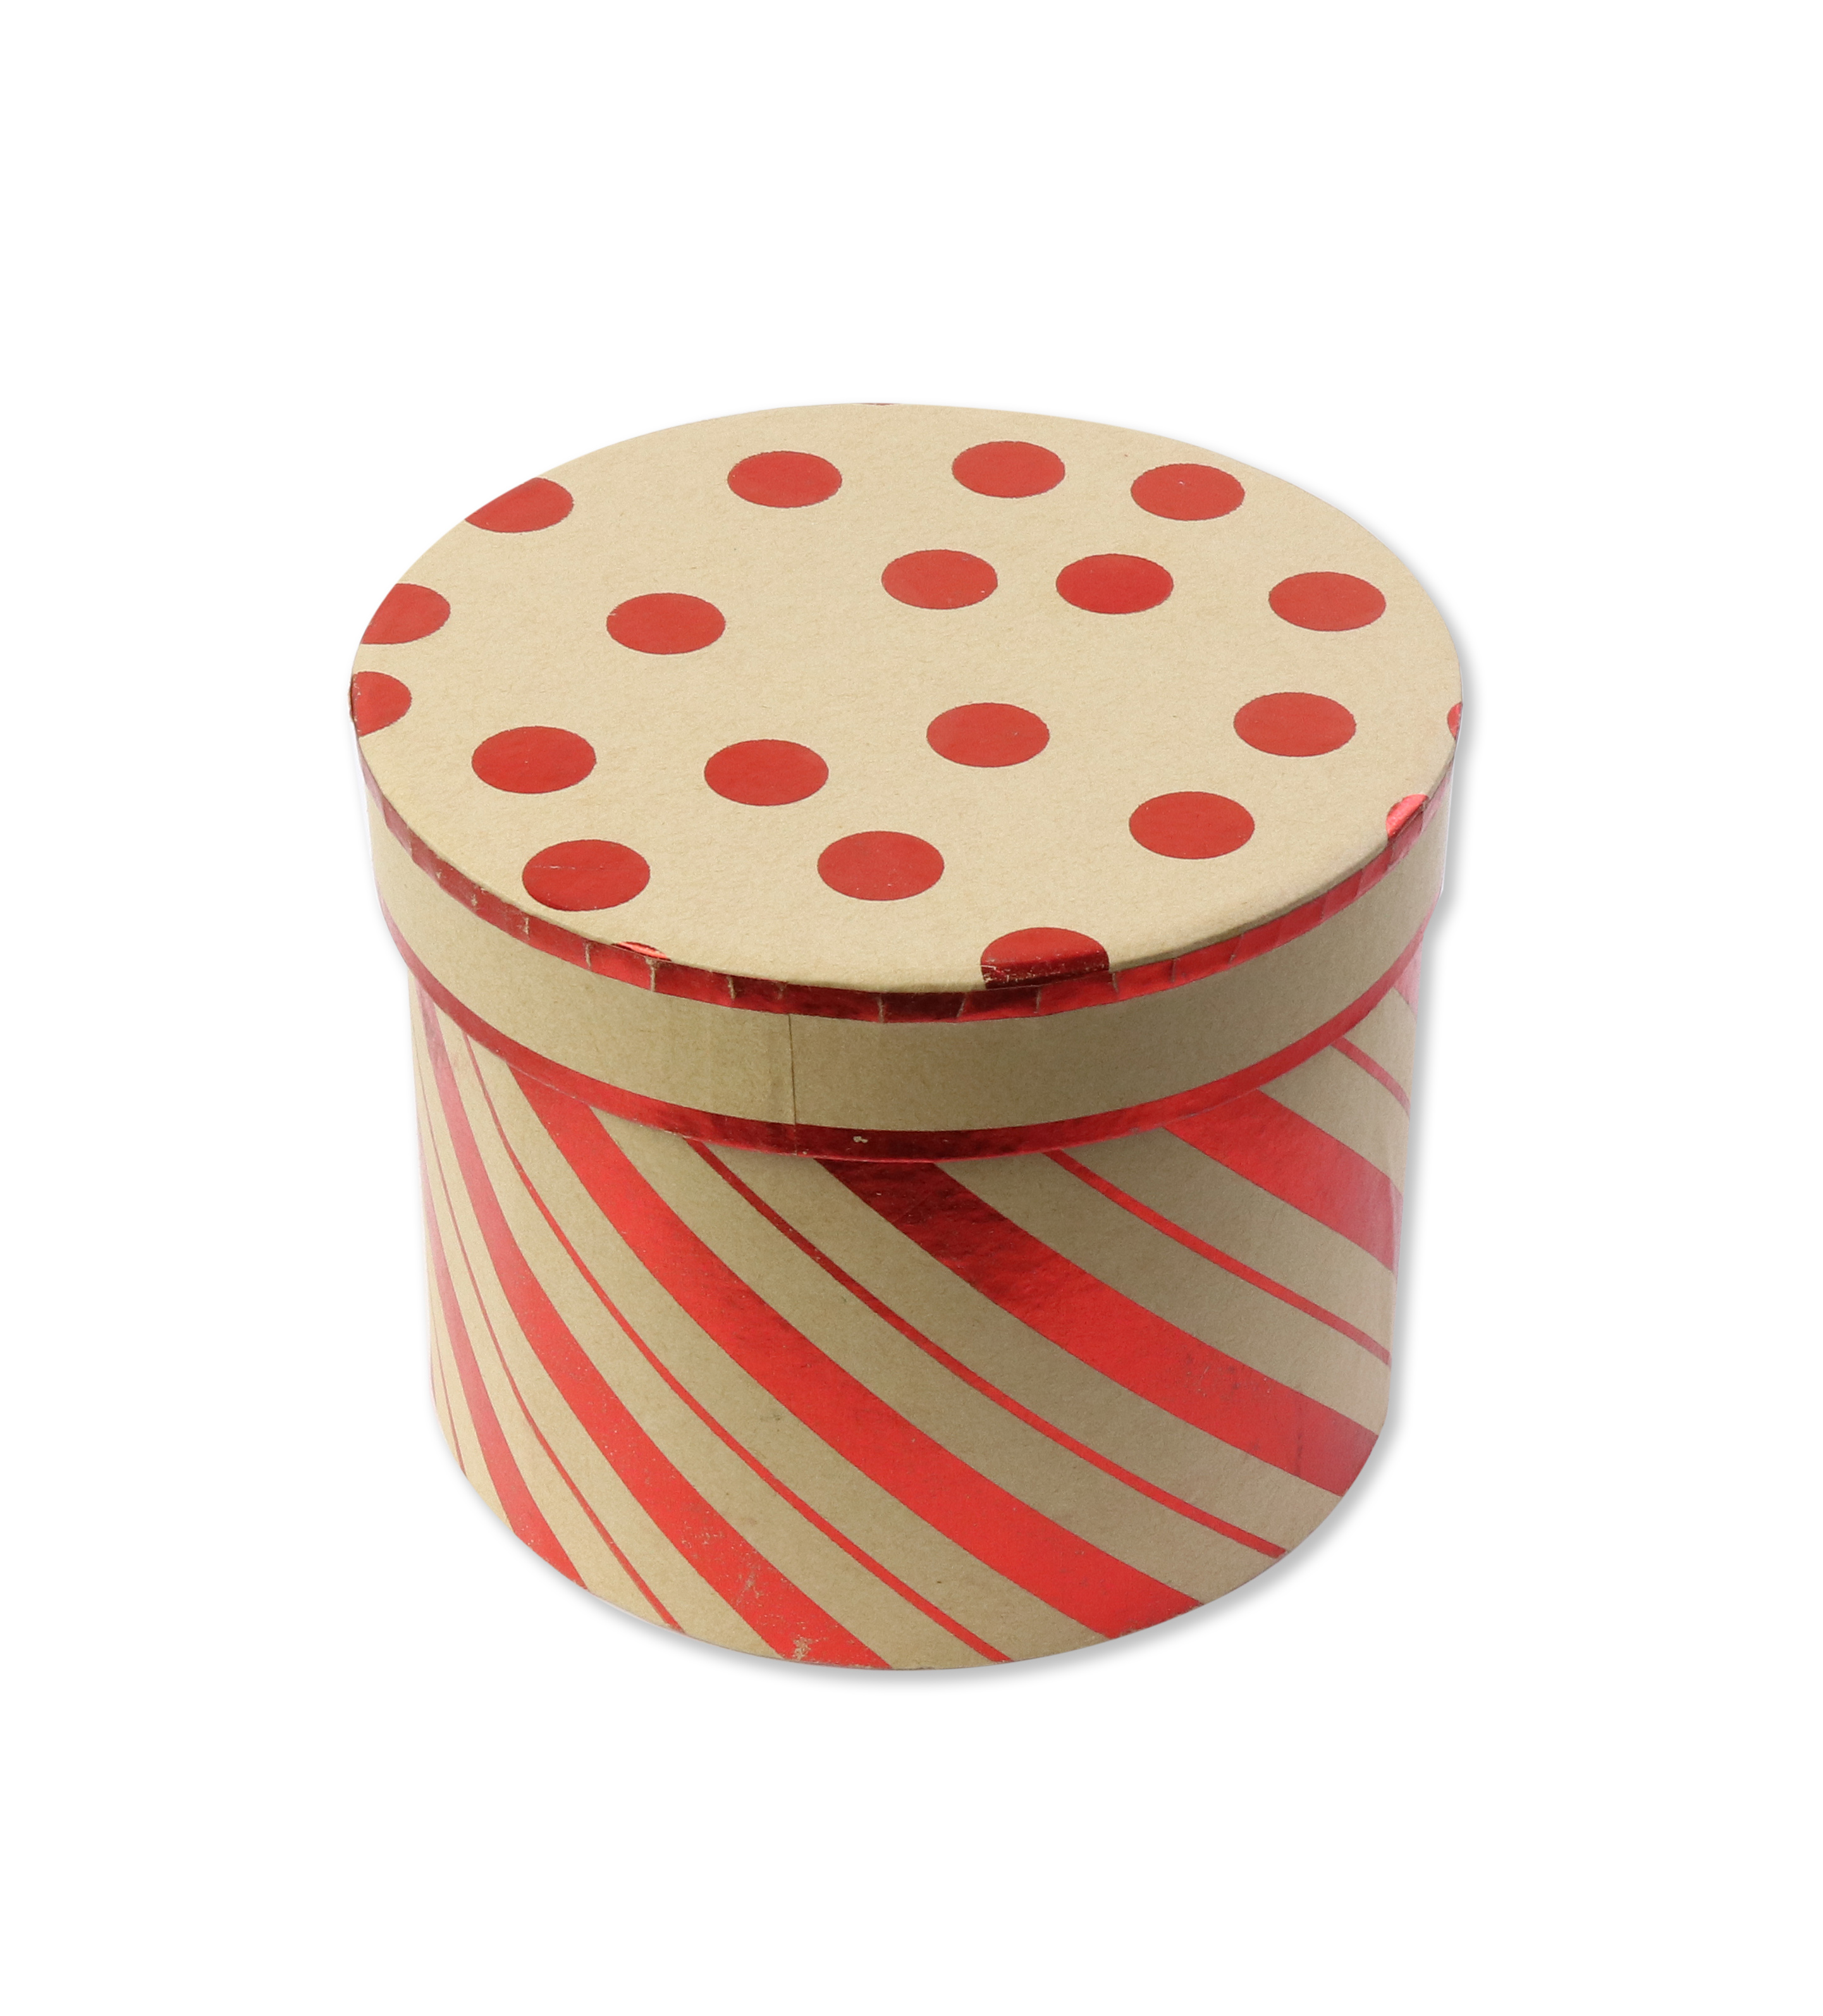 Cutie cadou - Christmas, Red Spots & Stripes, Round 13x11cm | Gifts and Craft